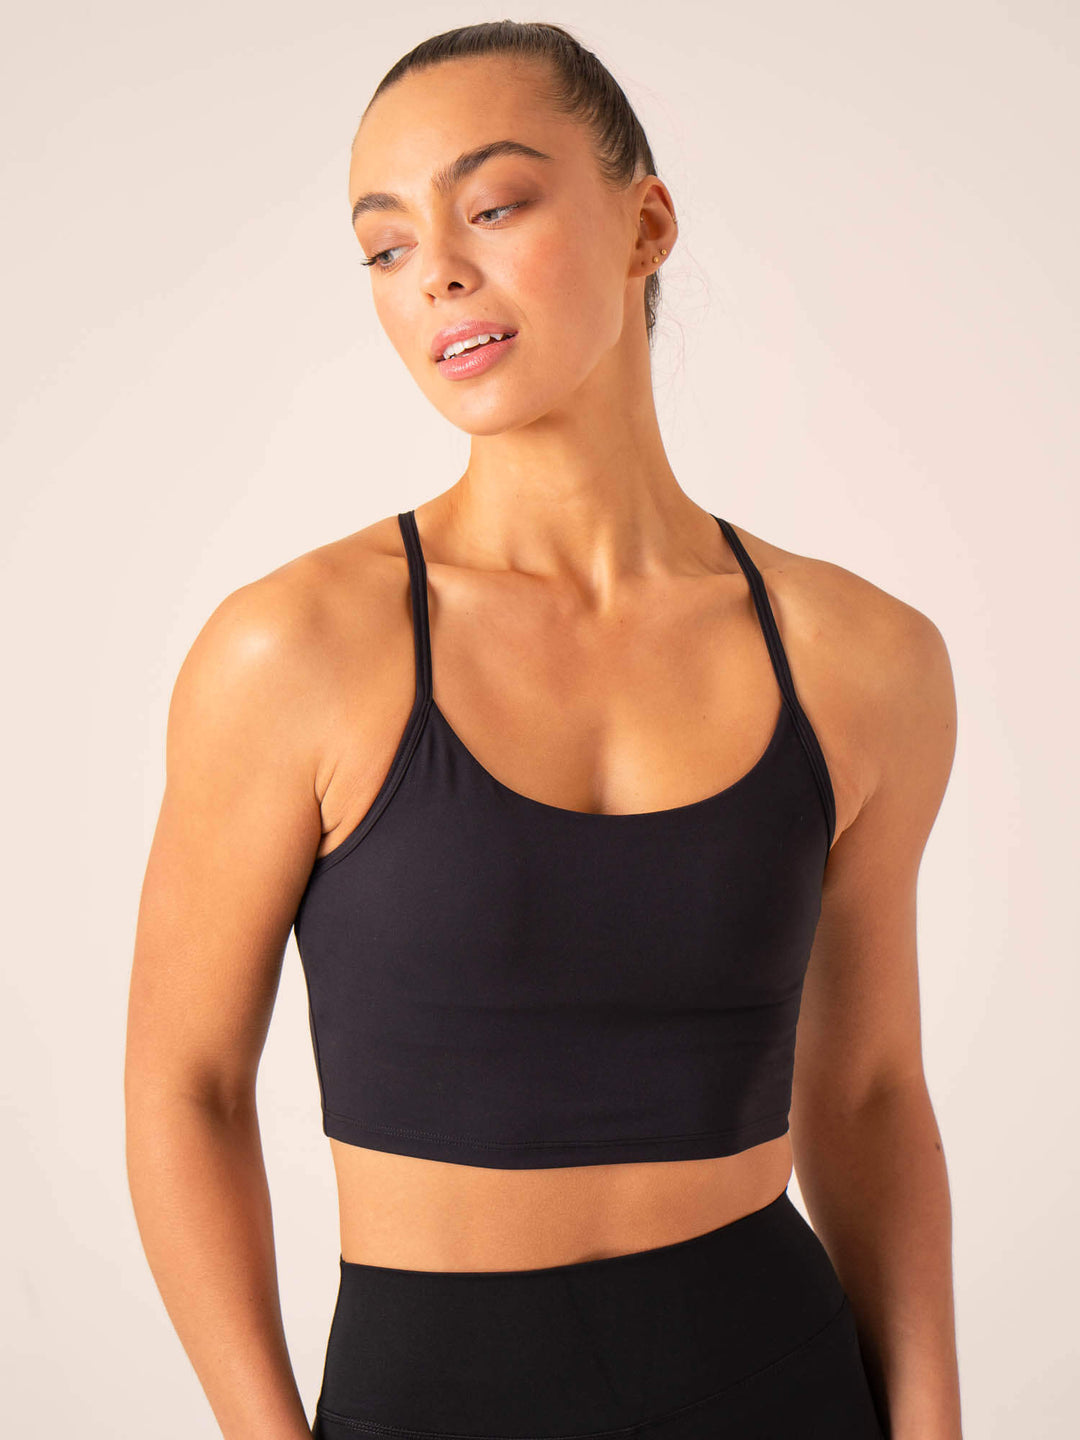 V FOR CITY Women's Flowy Tank Top with Built-in Bra UK